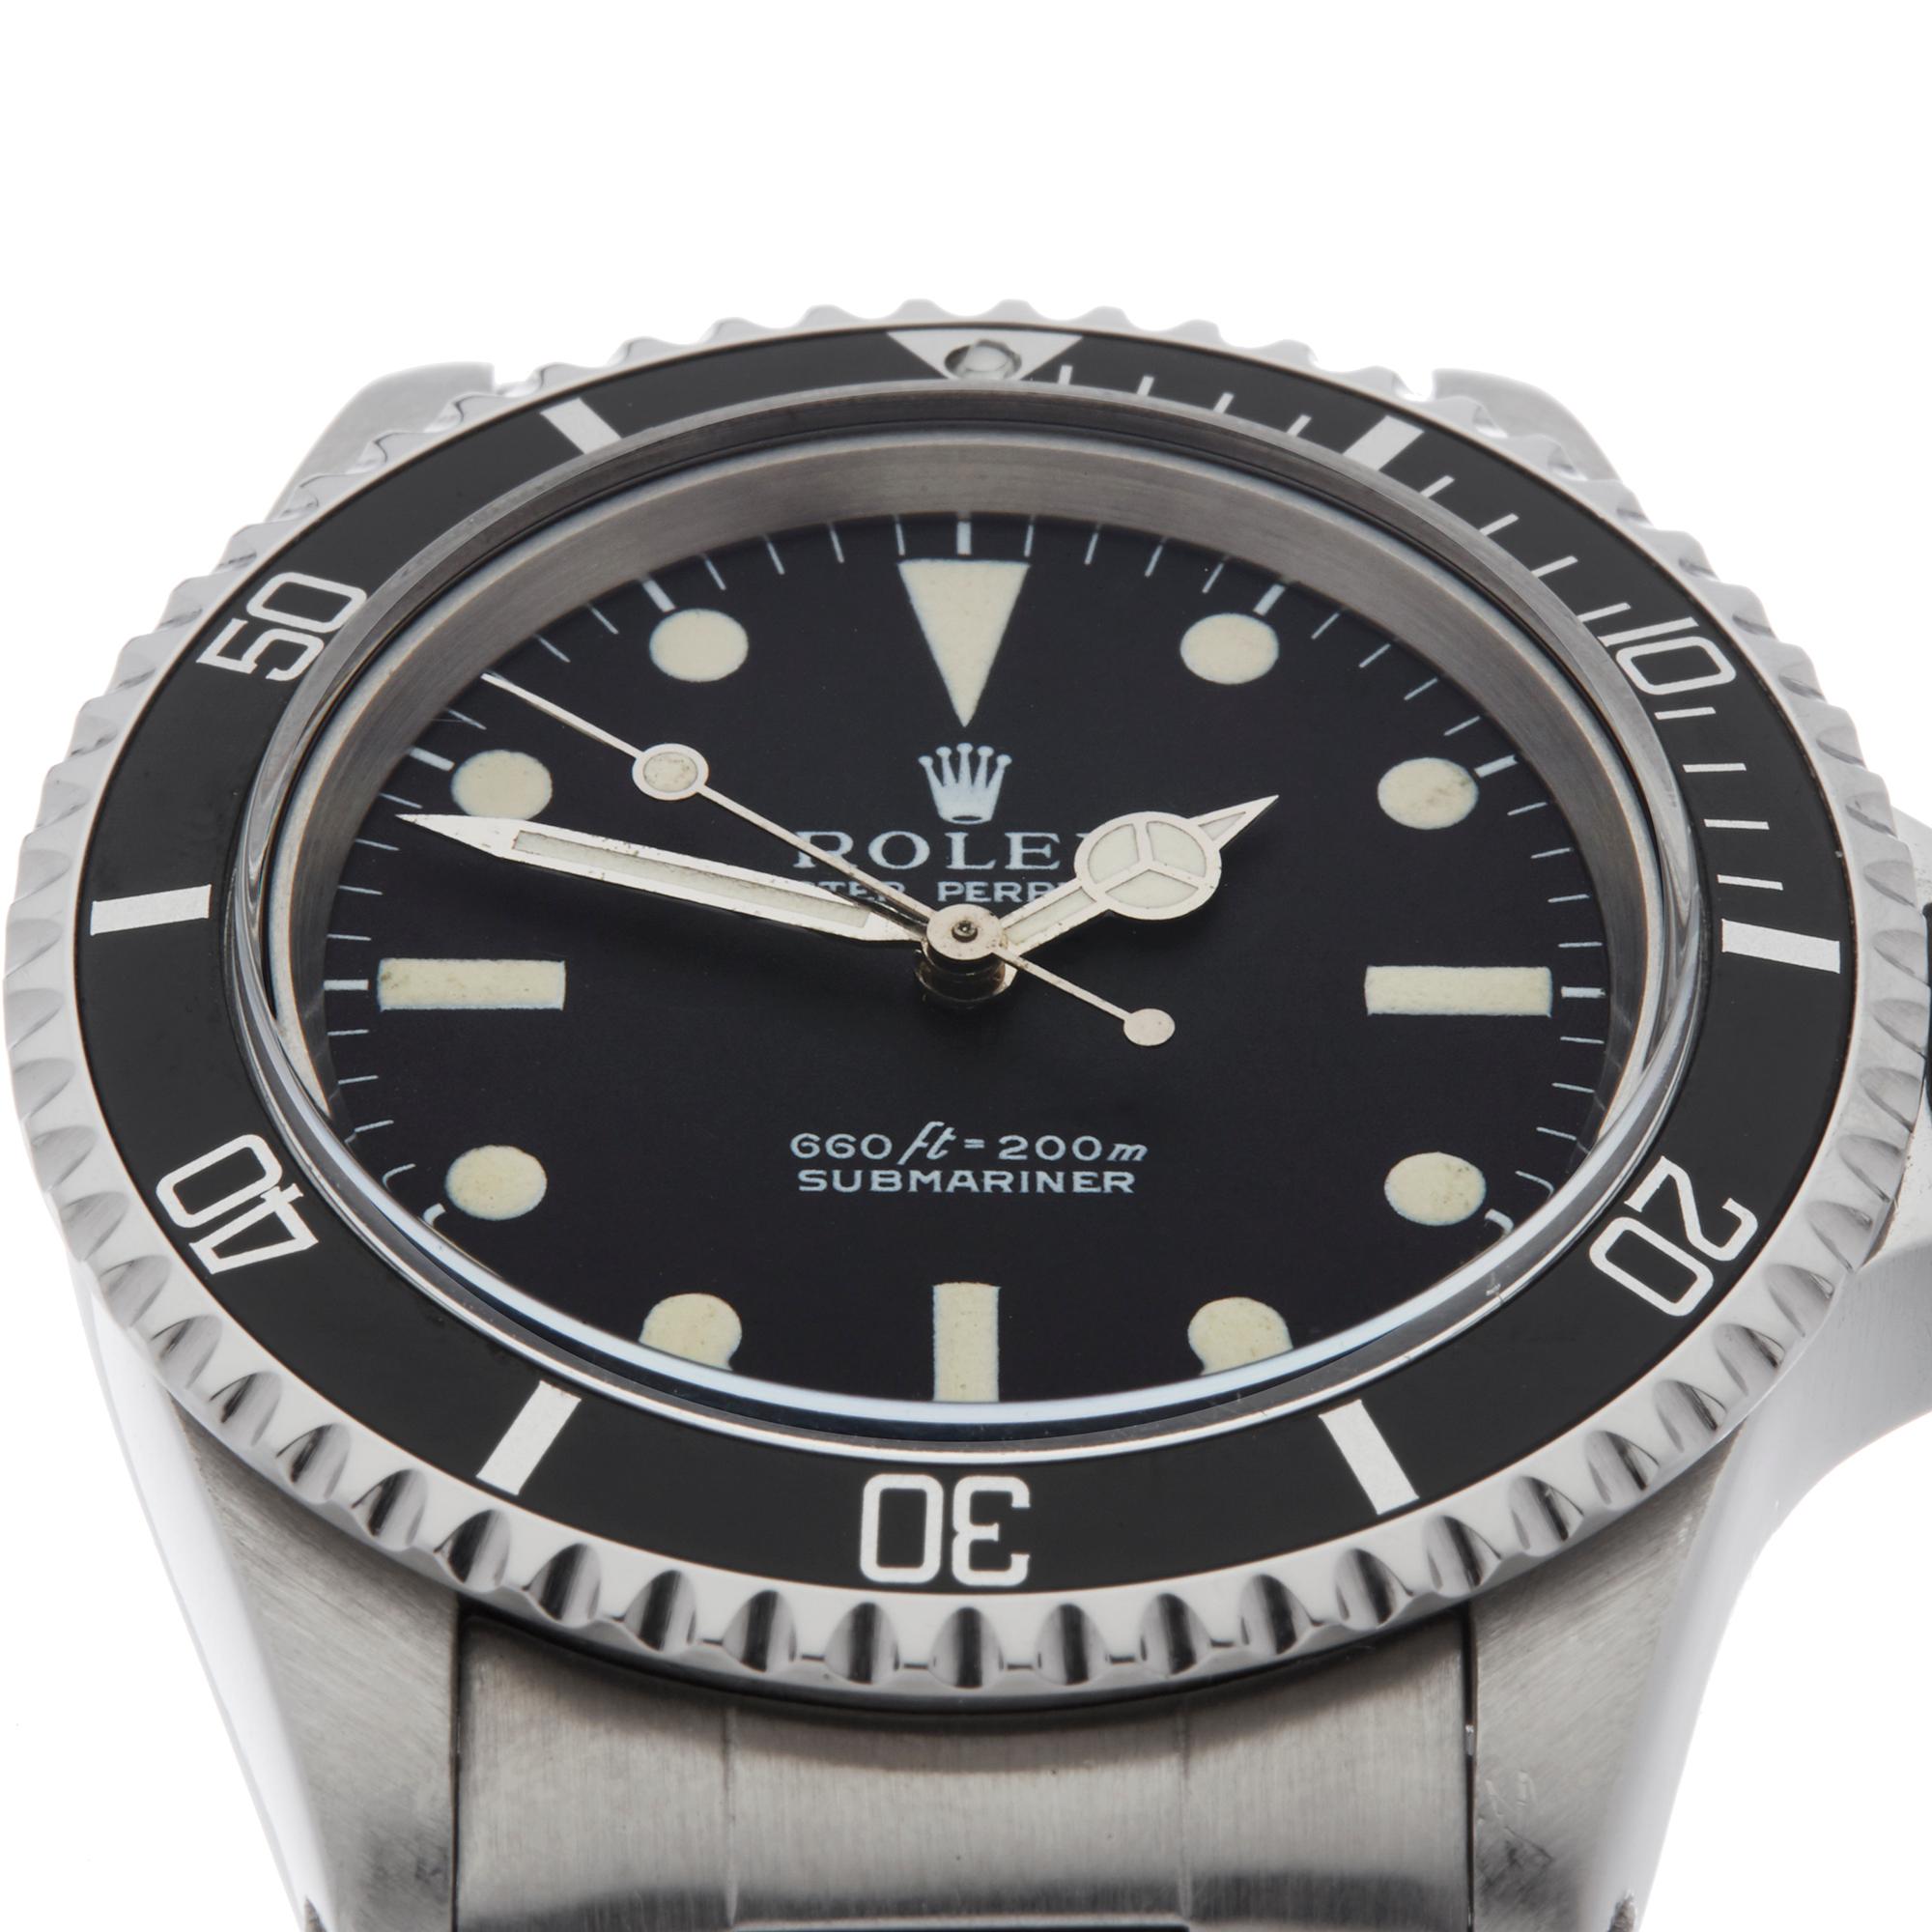 Ref: W6046
Manufacturer: Rolex
Model: Submariner
Model Ref: 5513
Age: Circa 1973
Gender: Mens
Complete With: Box, Manuals & Guarantee
Dial: Black Baton
Glass: Plexiglass
Movement: Automatic
Water Resistance: To Manufacturers Specifications
Case: